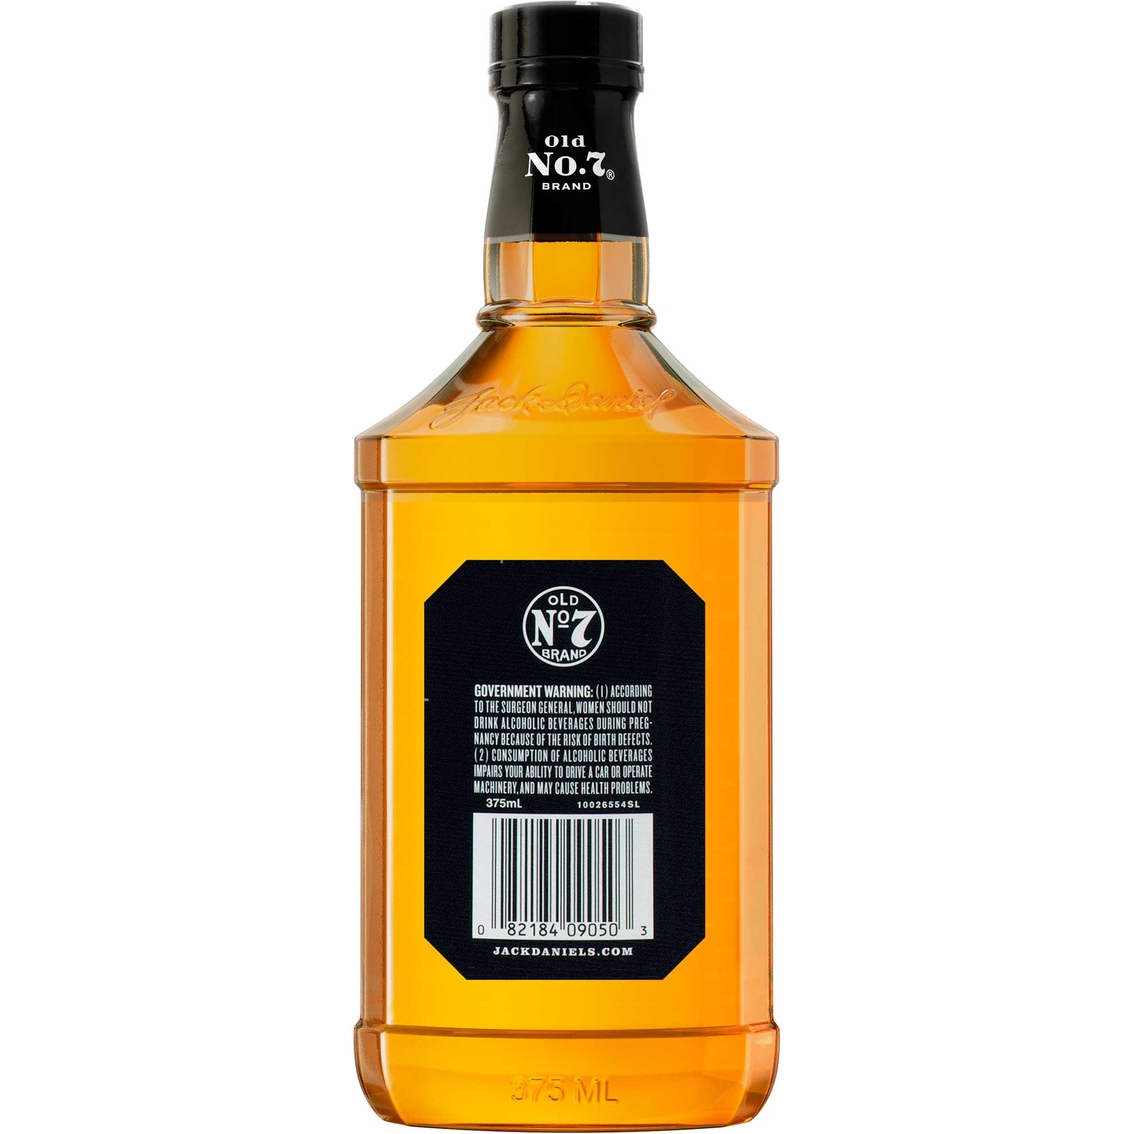 Jack Daniel's Tennessee Whiskey 375ml - Image 2 of 2